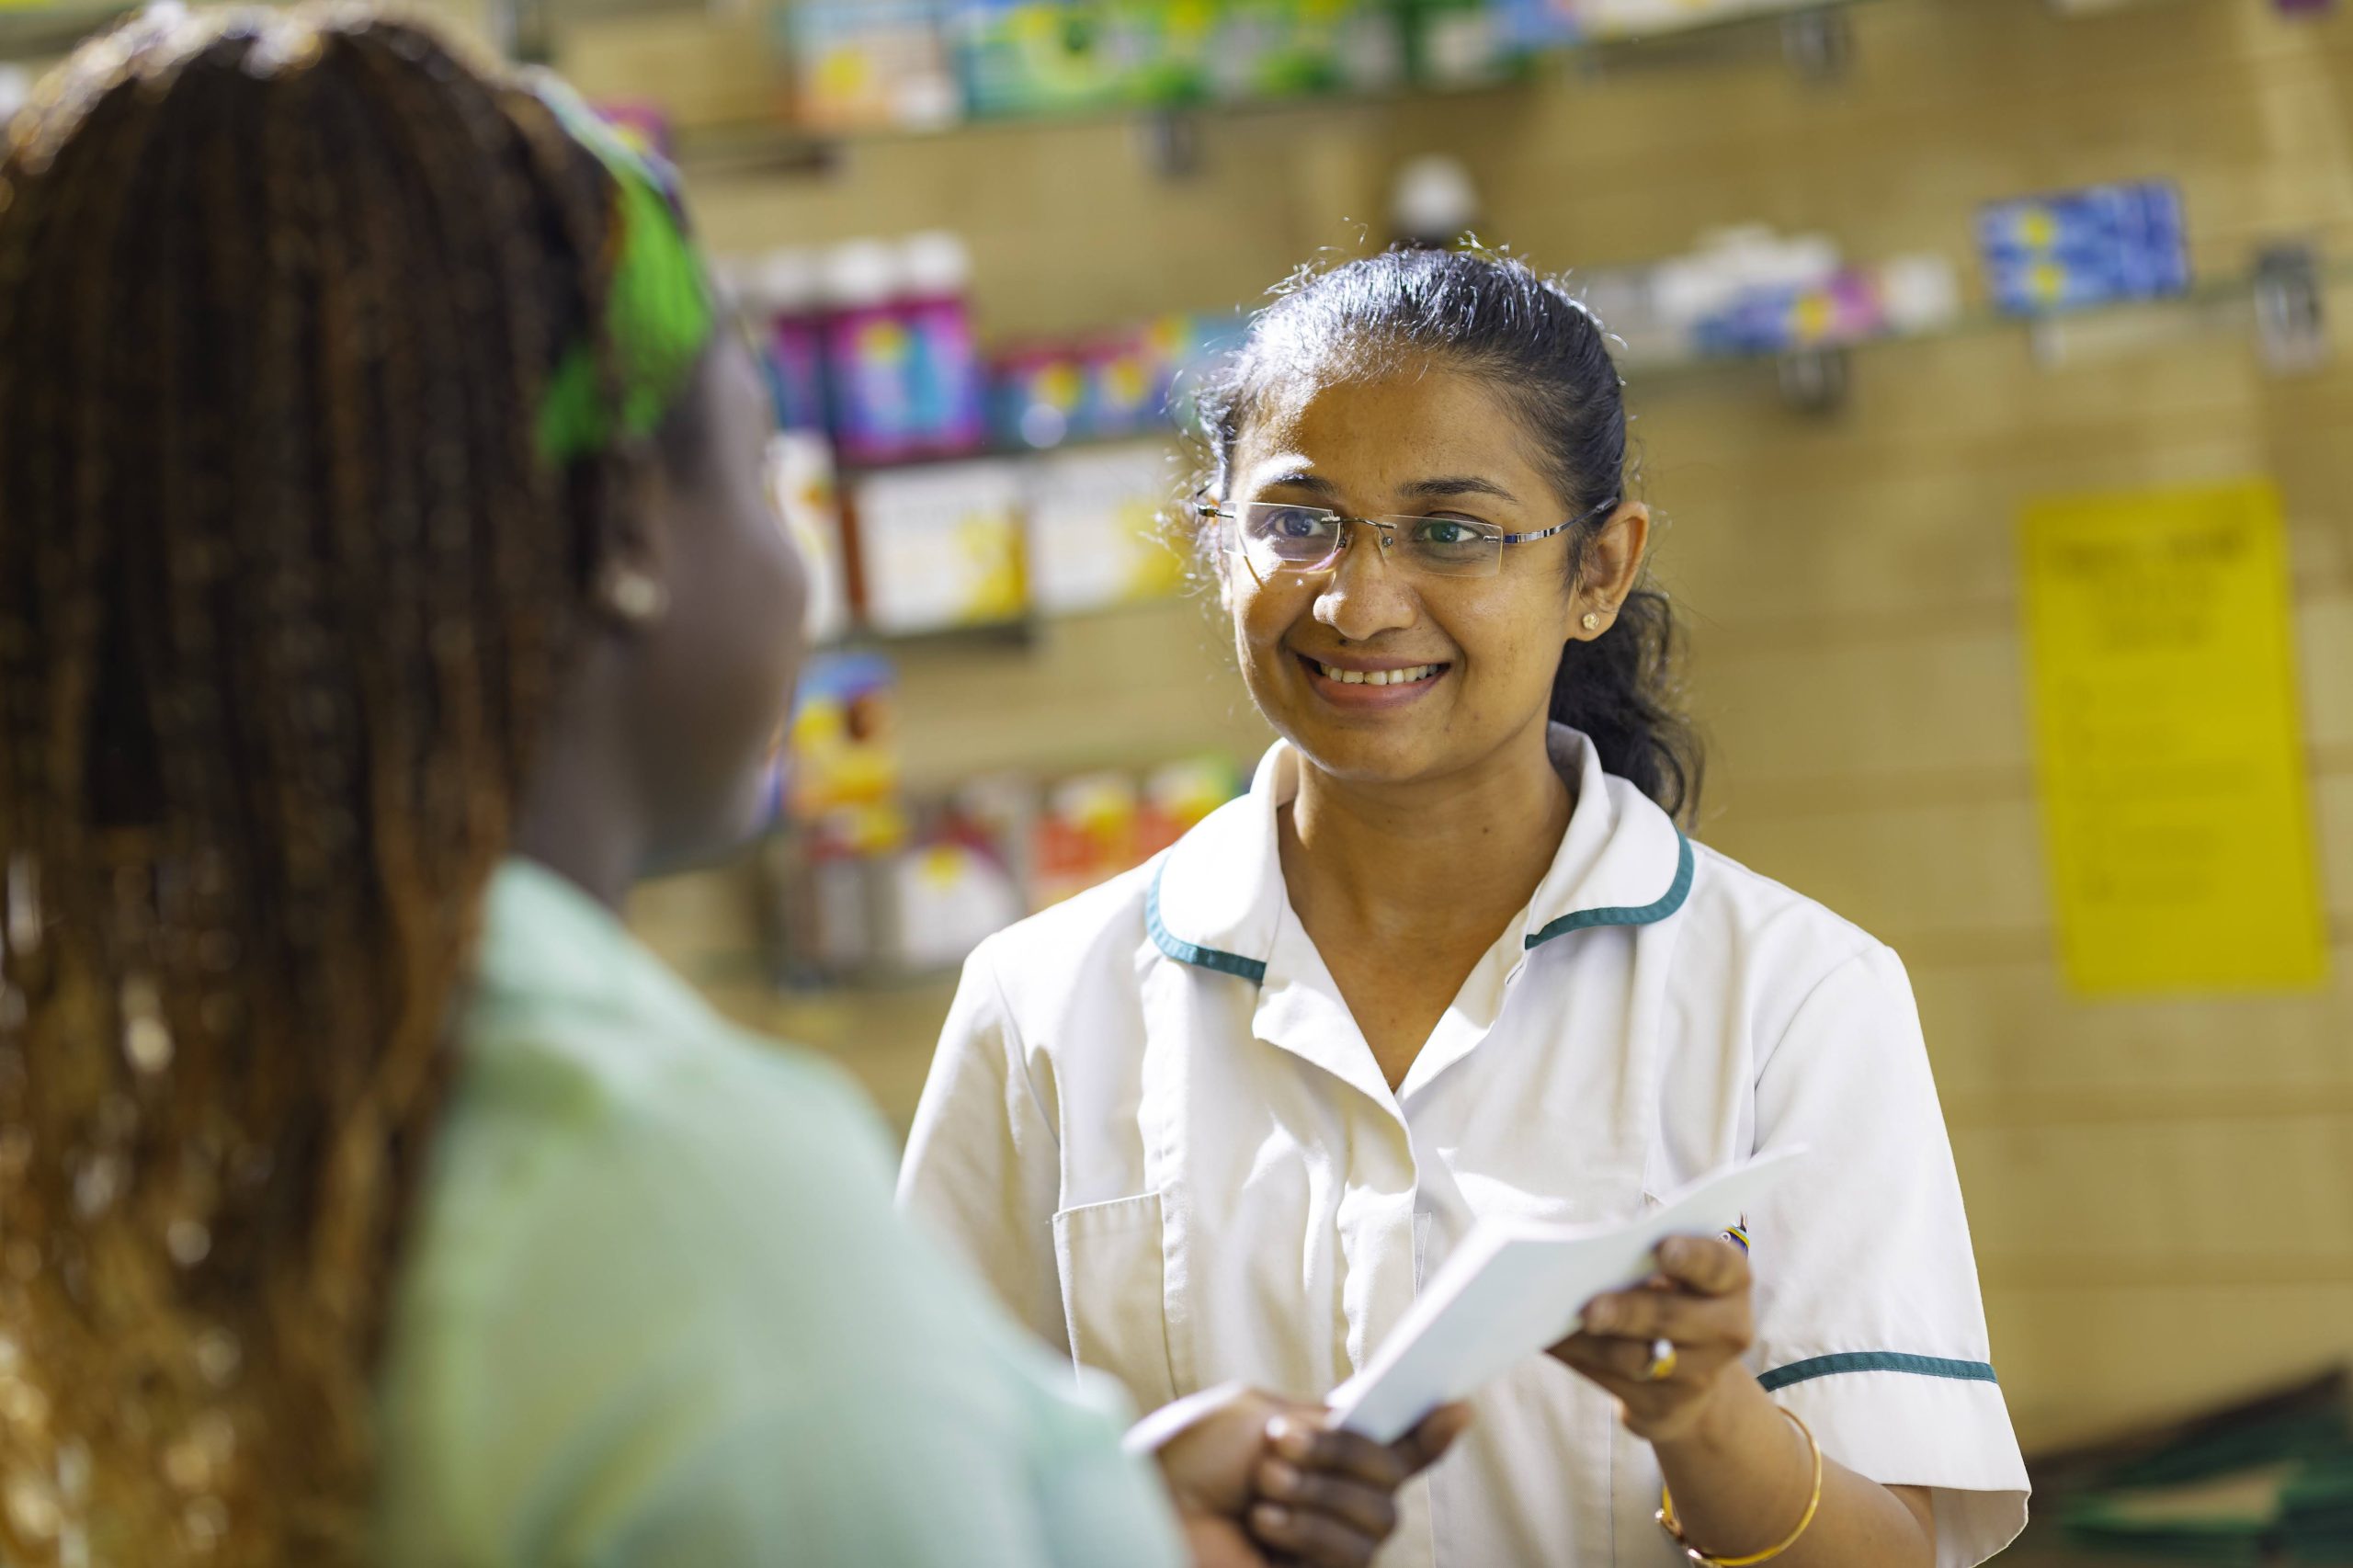 A pharmacist talking to a patient